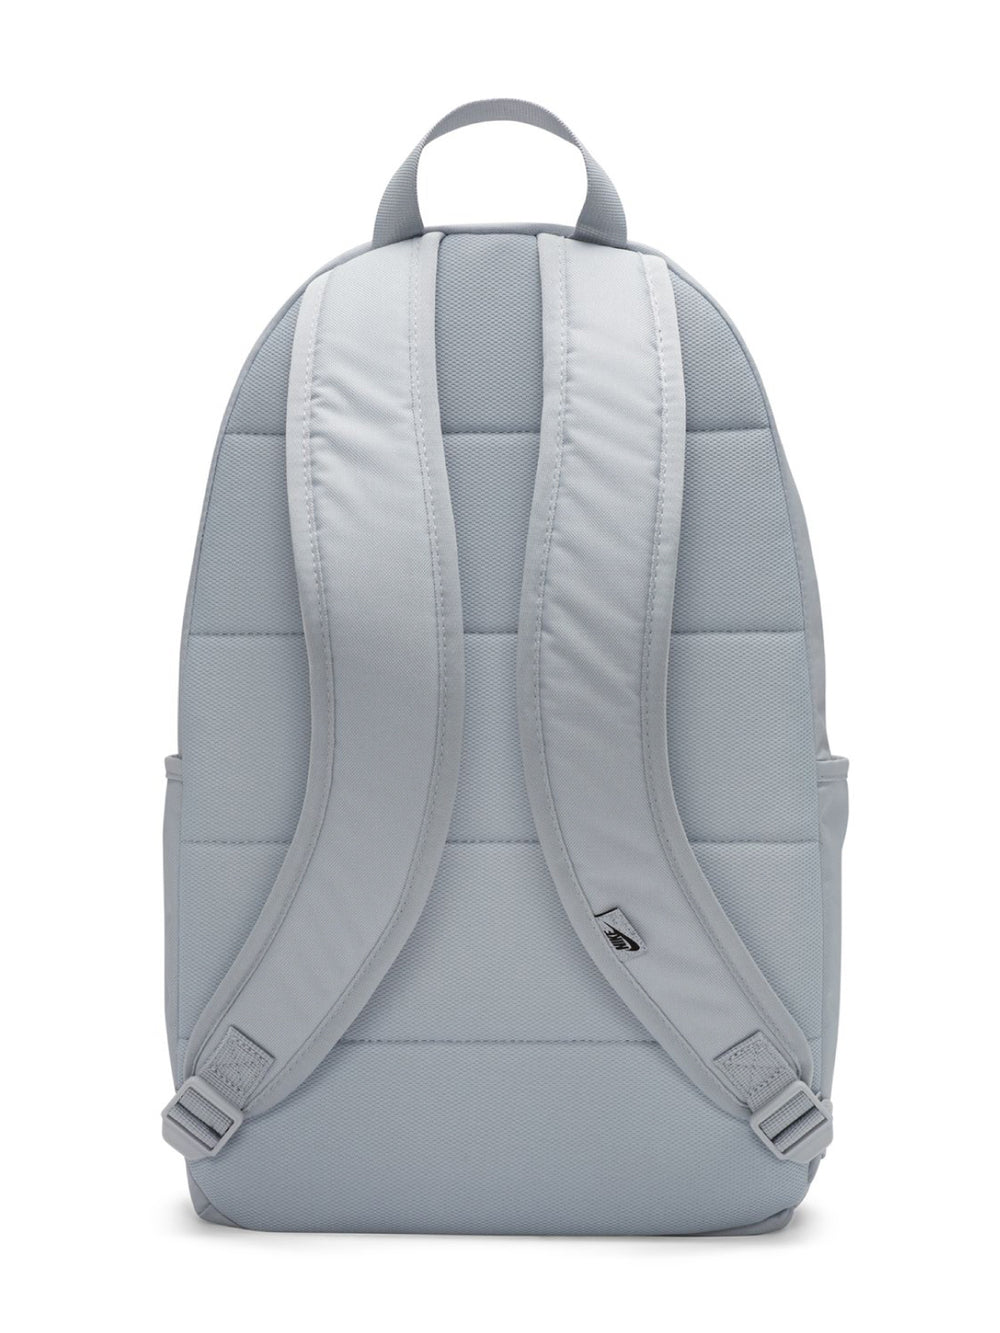 NIKE ELEMENTAL BACKPACK WOLF GREY | Boathouse Footwear Collective